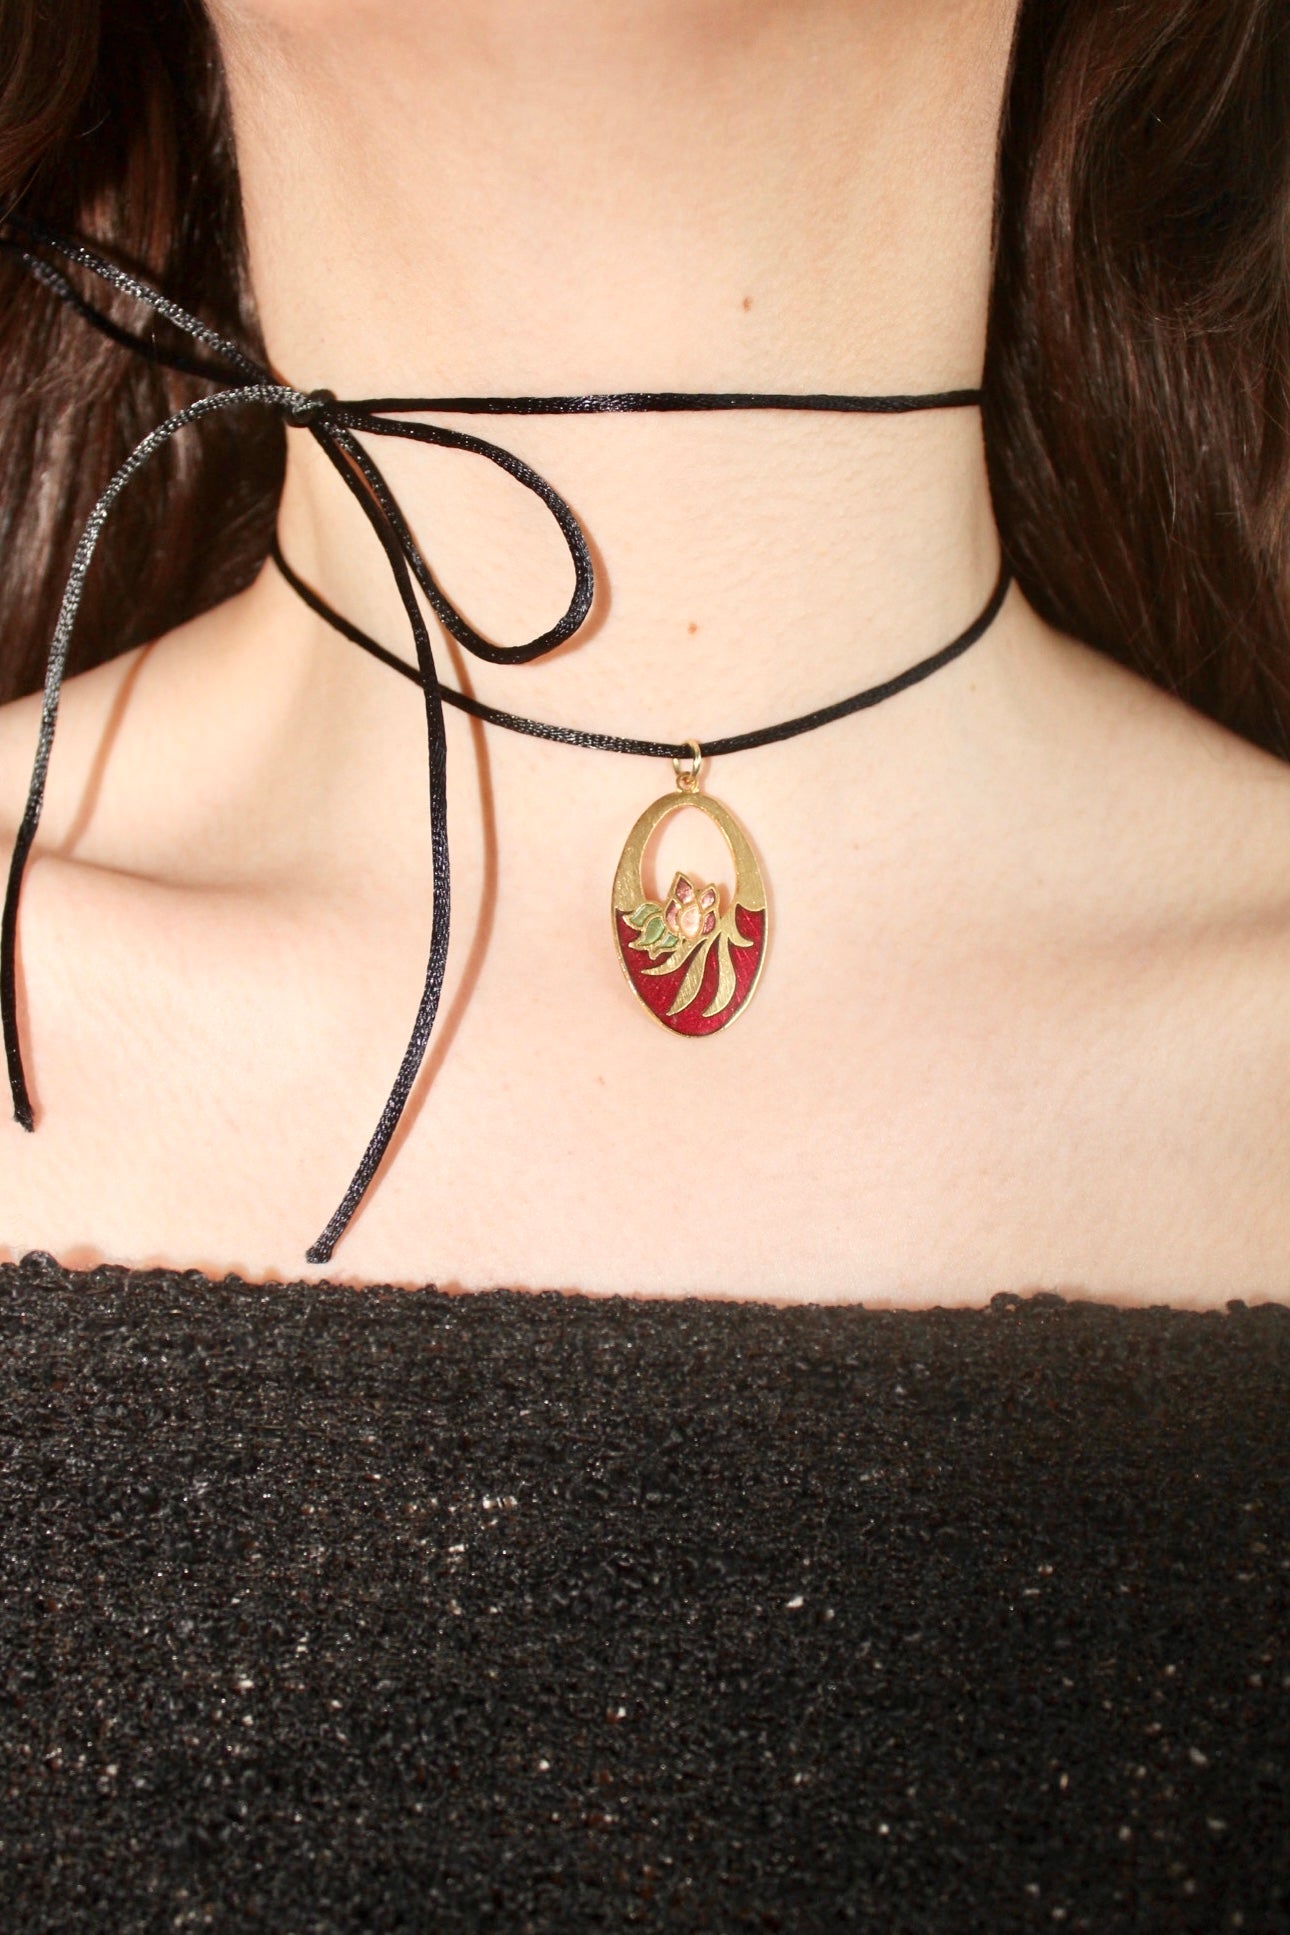 Ruby Oval Pendant Choker With Cutout Design Strung On Satin Cord With A Choice From 5 Colors